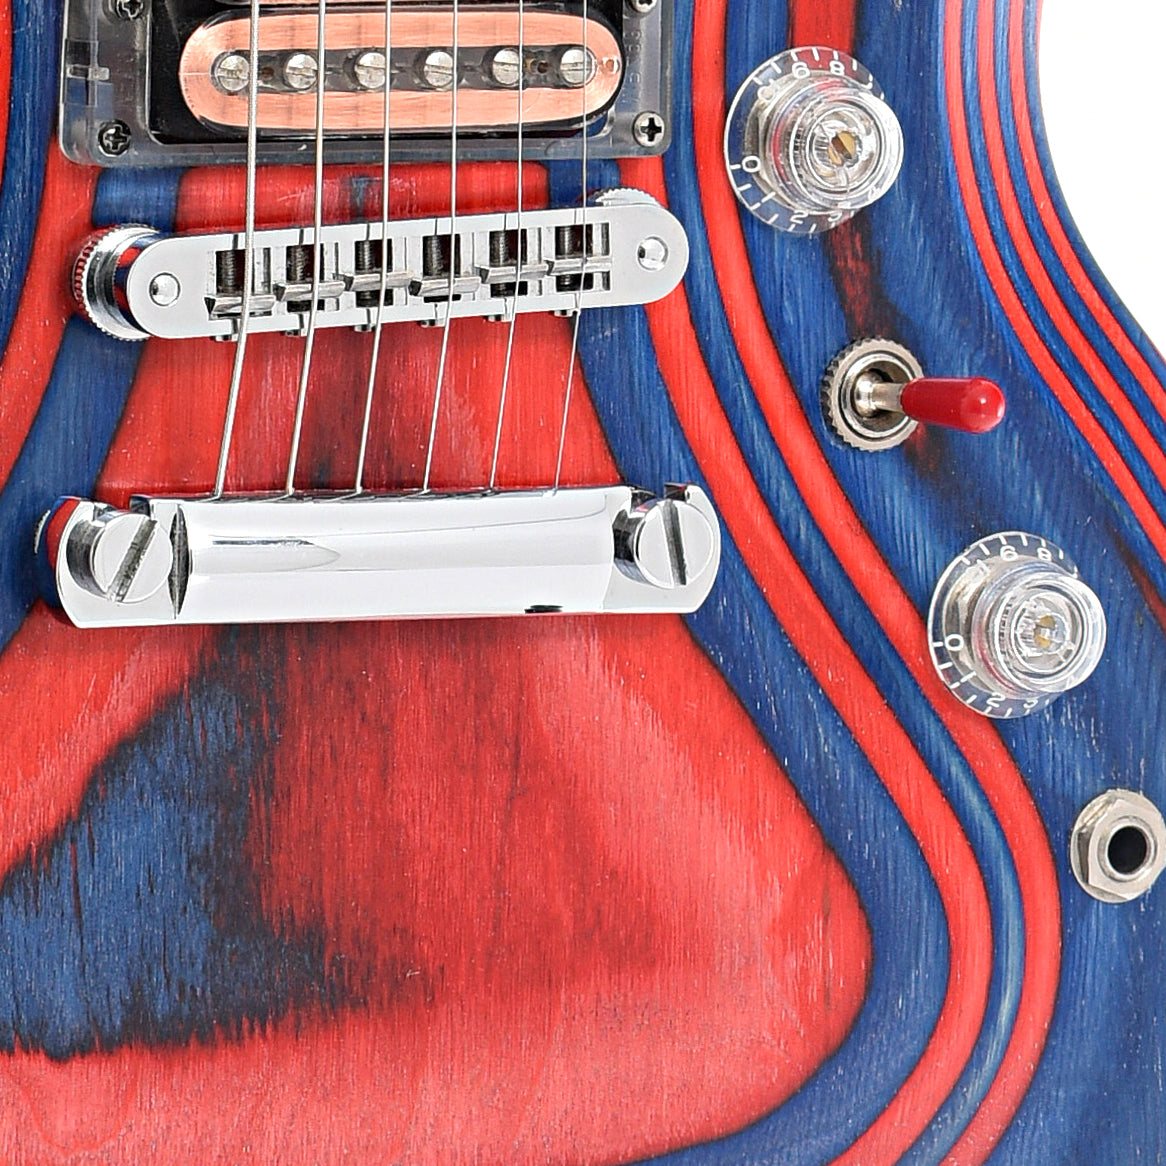 Bridge, tailpiece and controls of Gibson Zoot Suit SG Electric Guitar (2009)